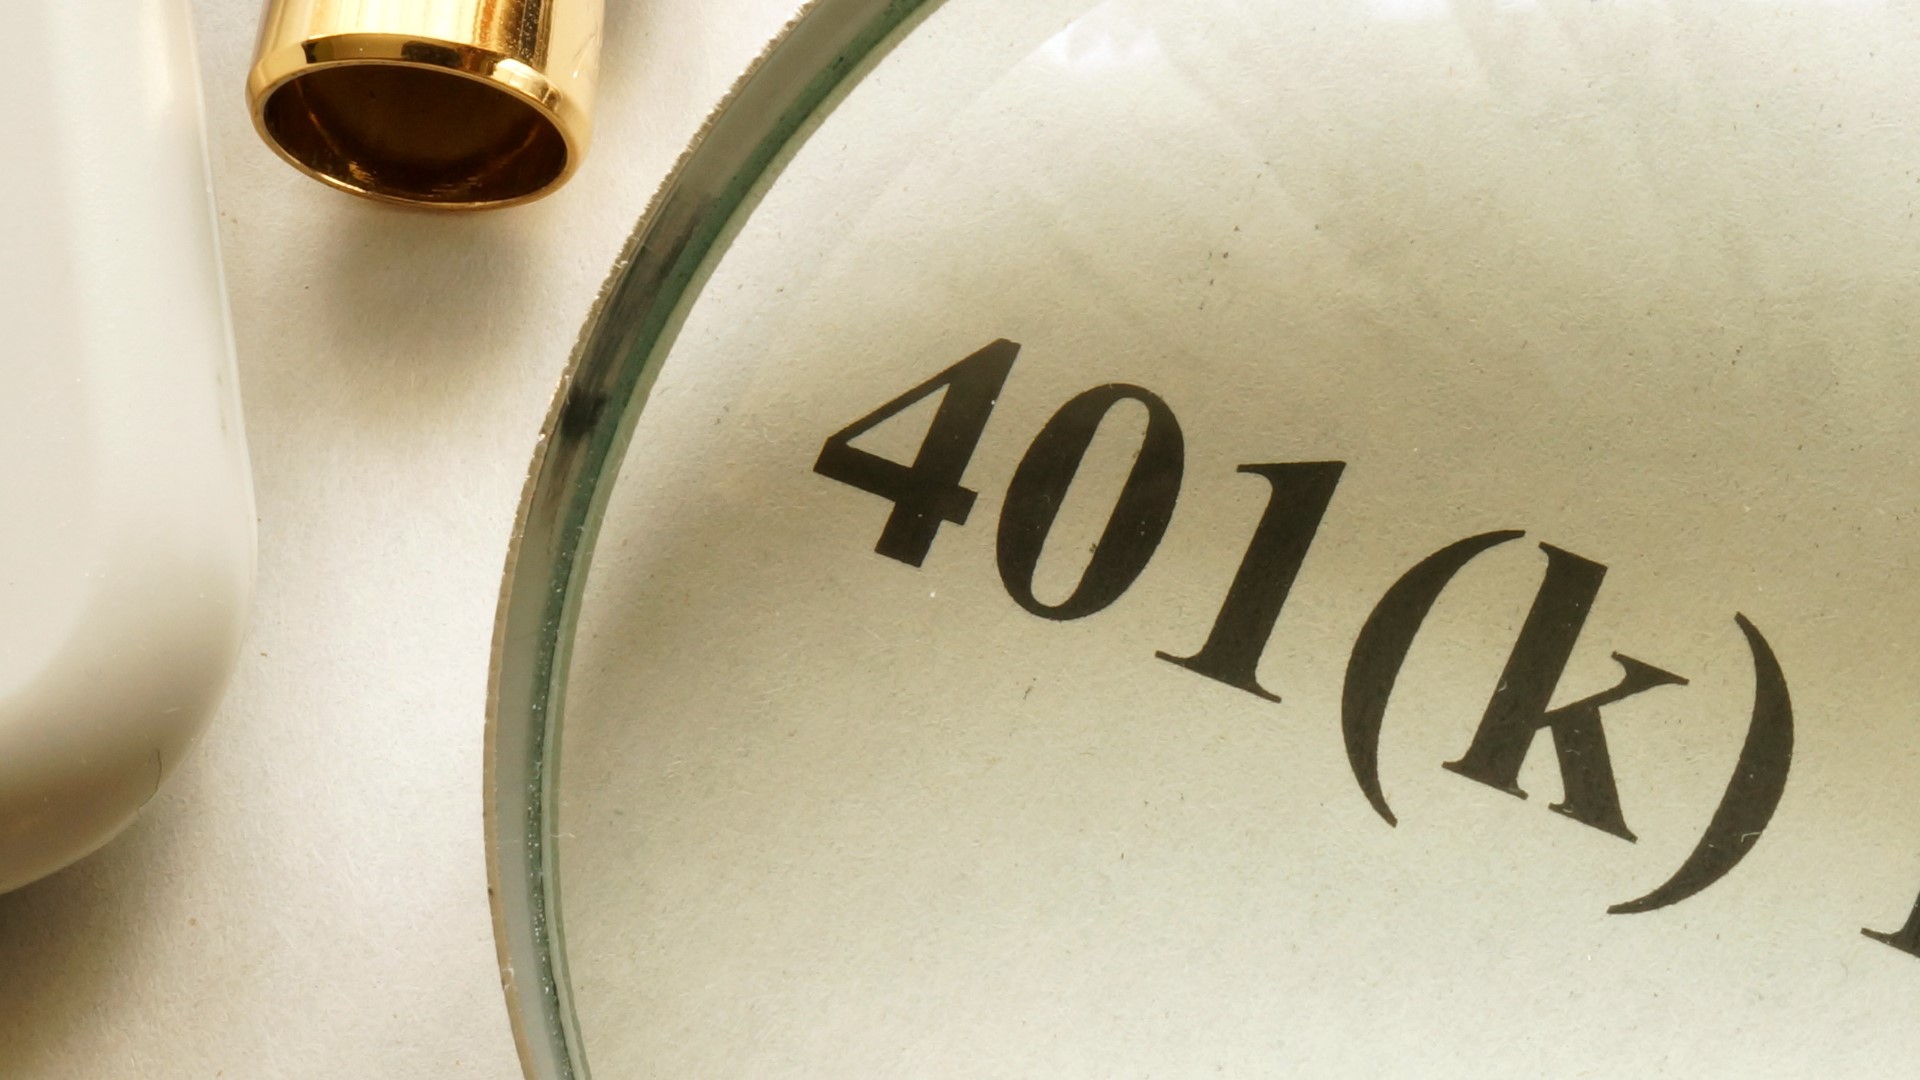 Do you pay close attention to your benefits? A 401(k) is designed to help build your future.